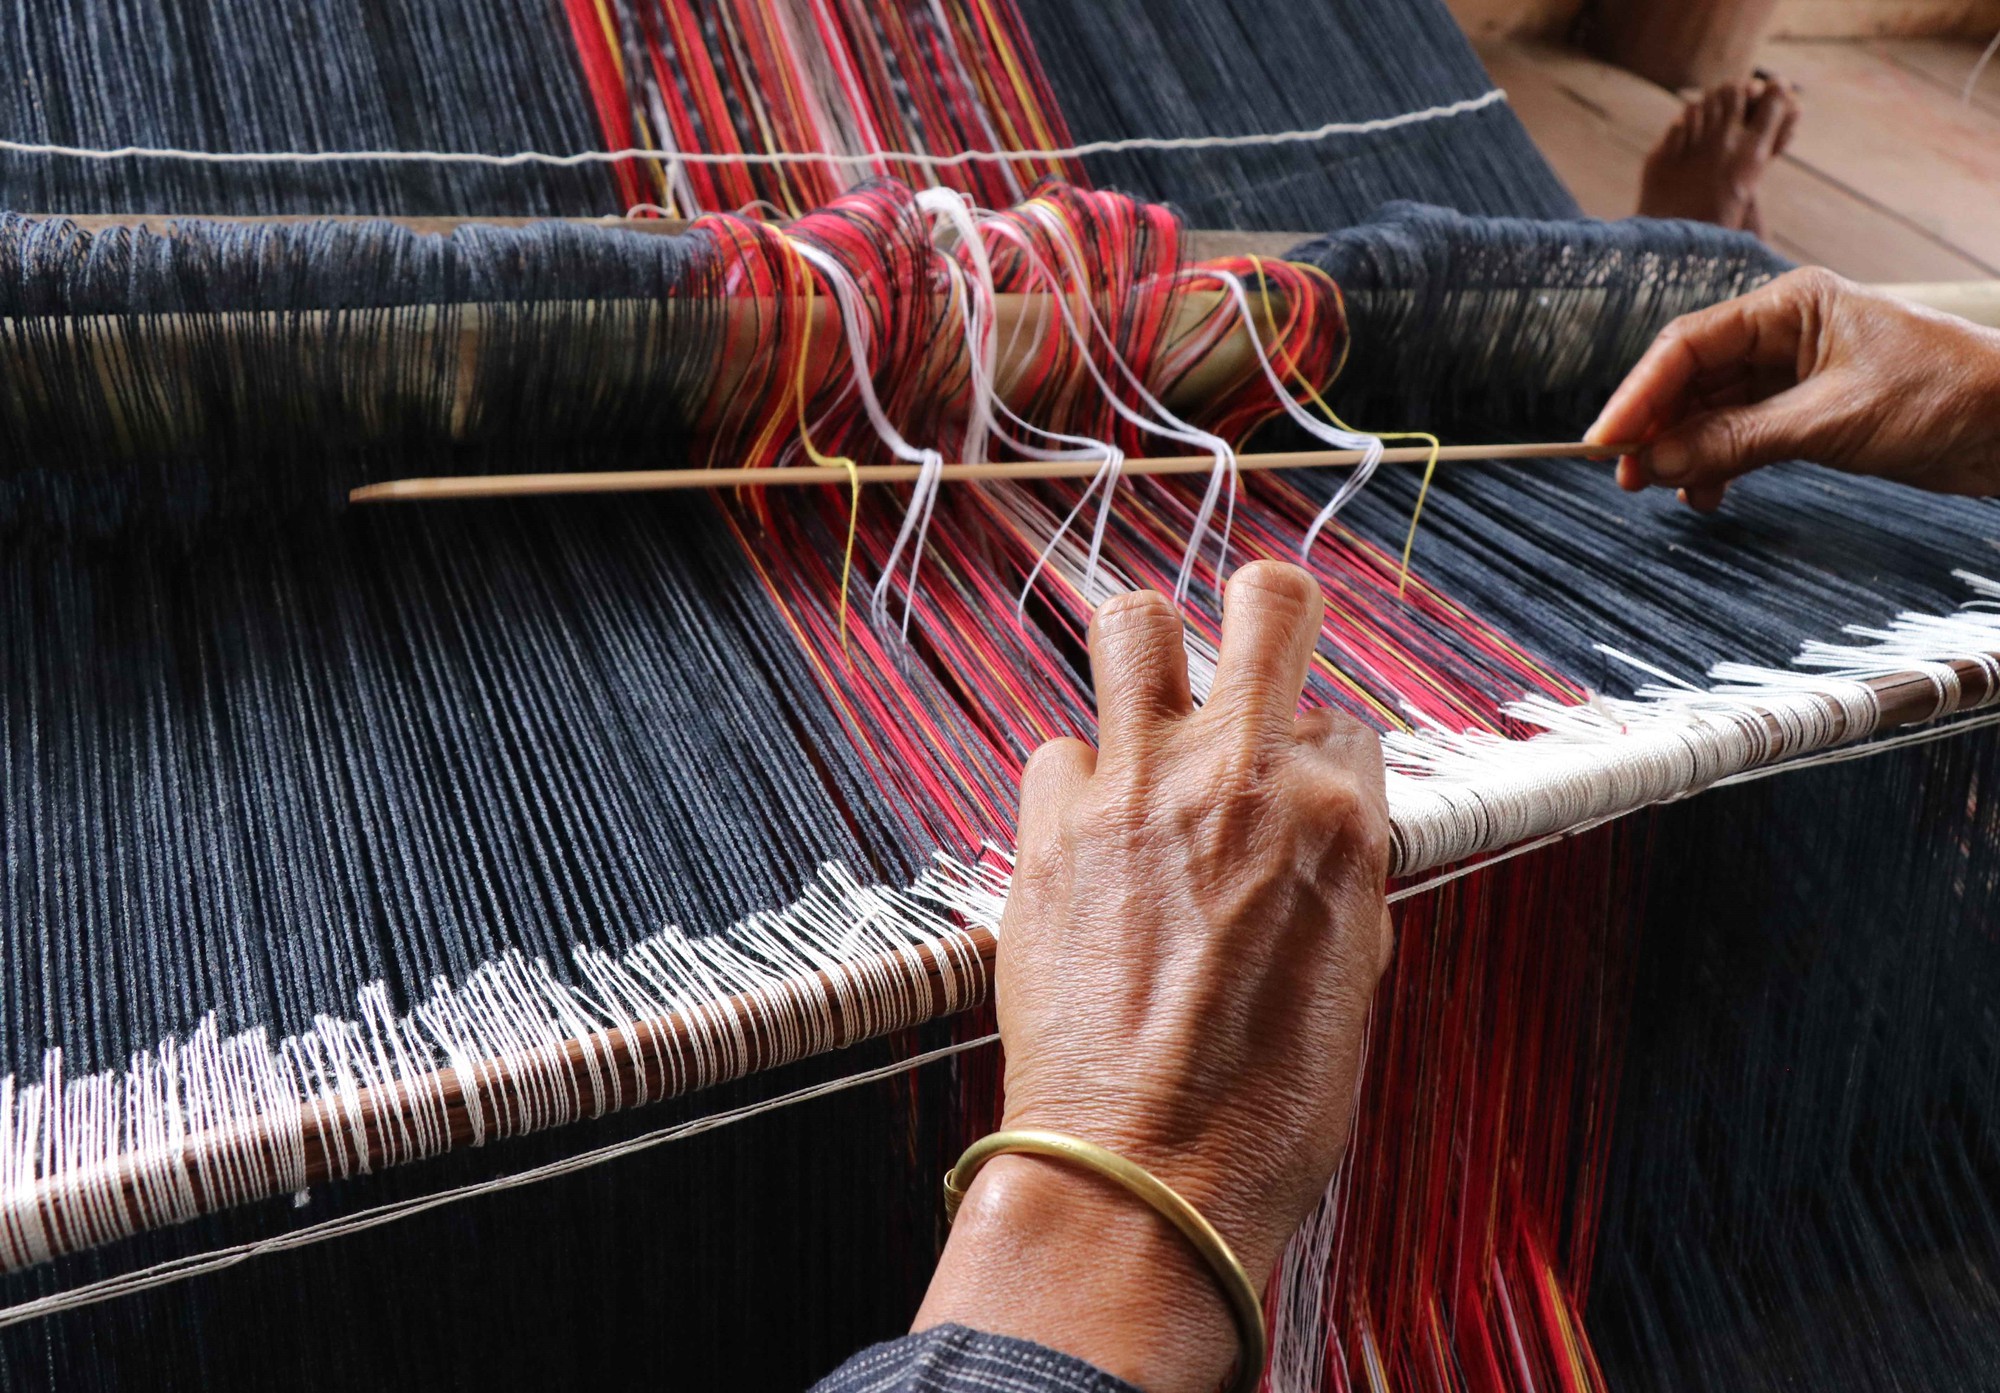 Explore the hills of Sapa and experience its unique handicrafts